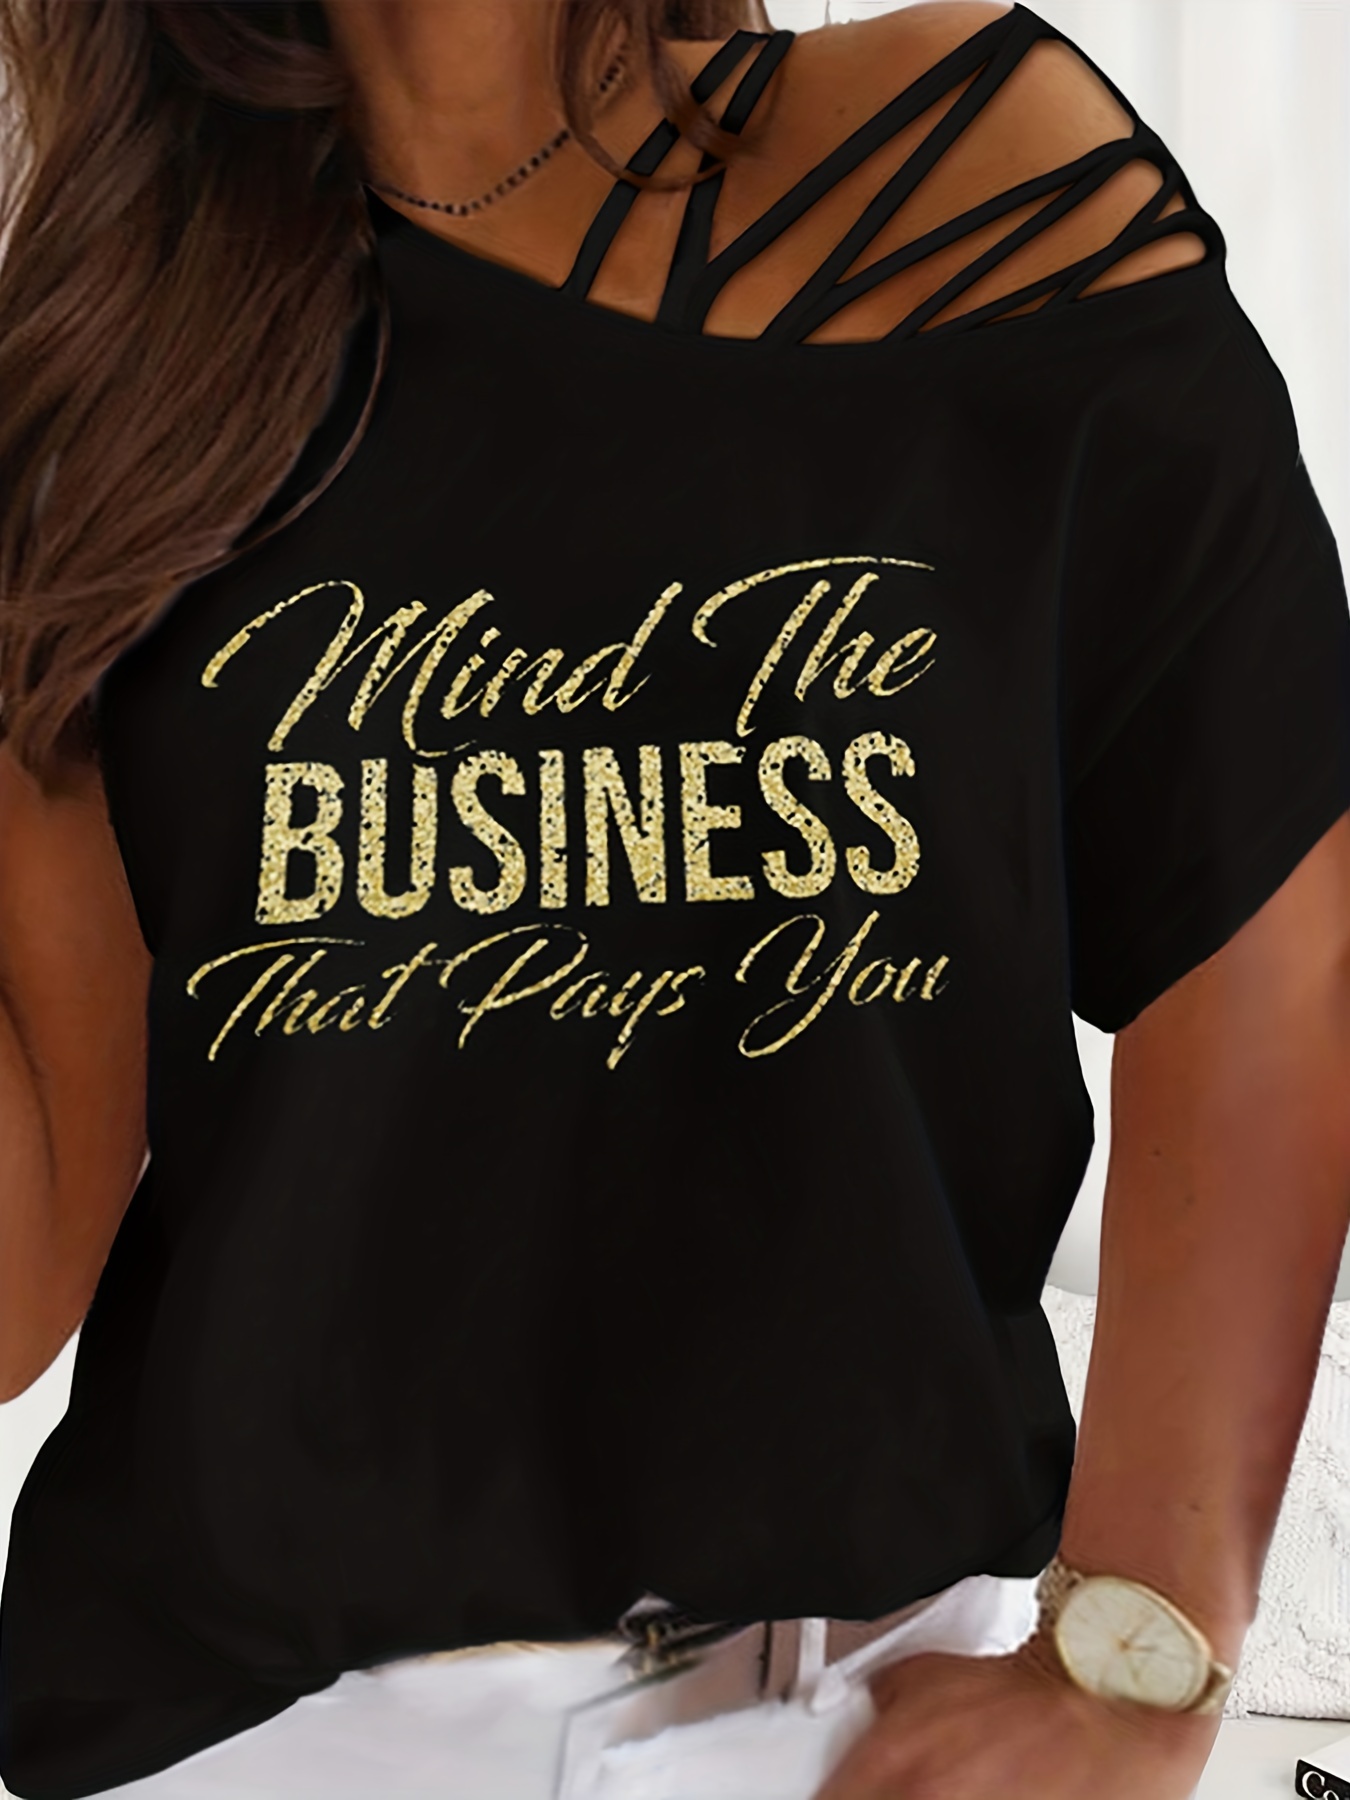 Womens Yours Curve Printed T-Shirt - Black